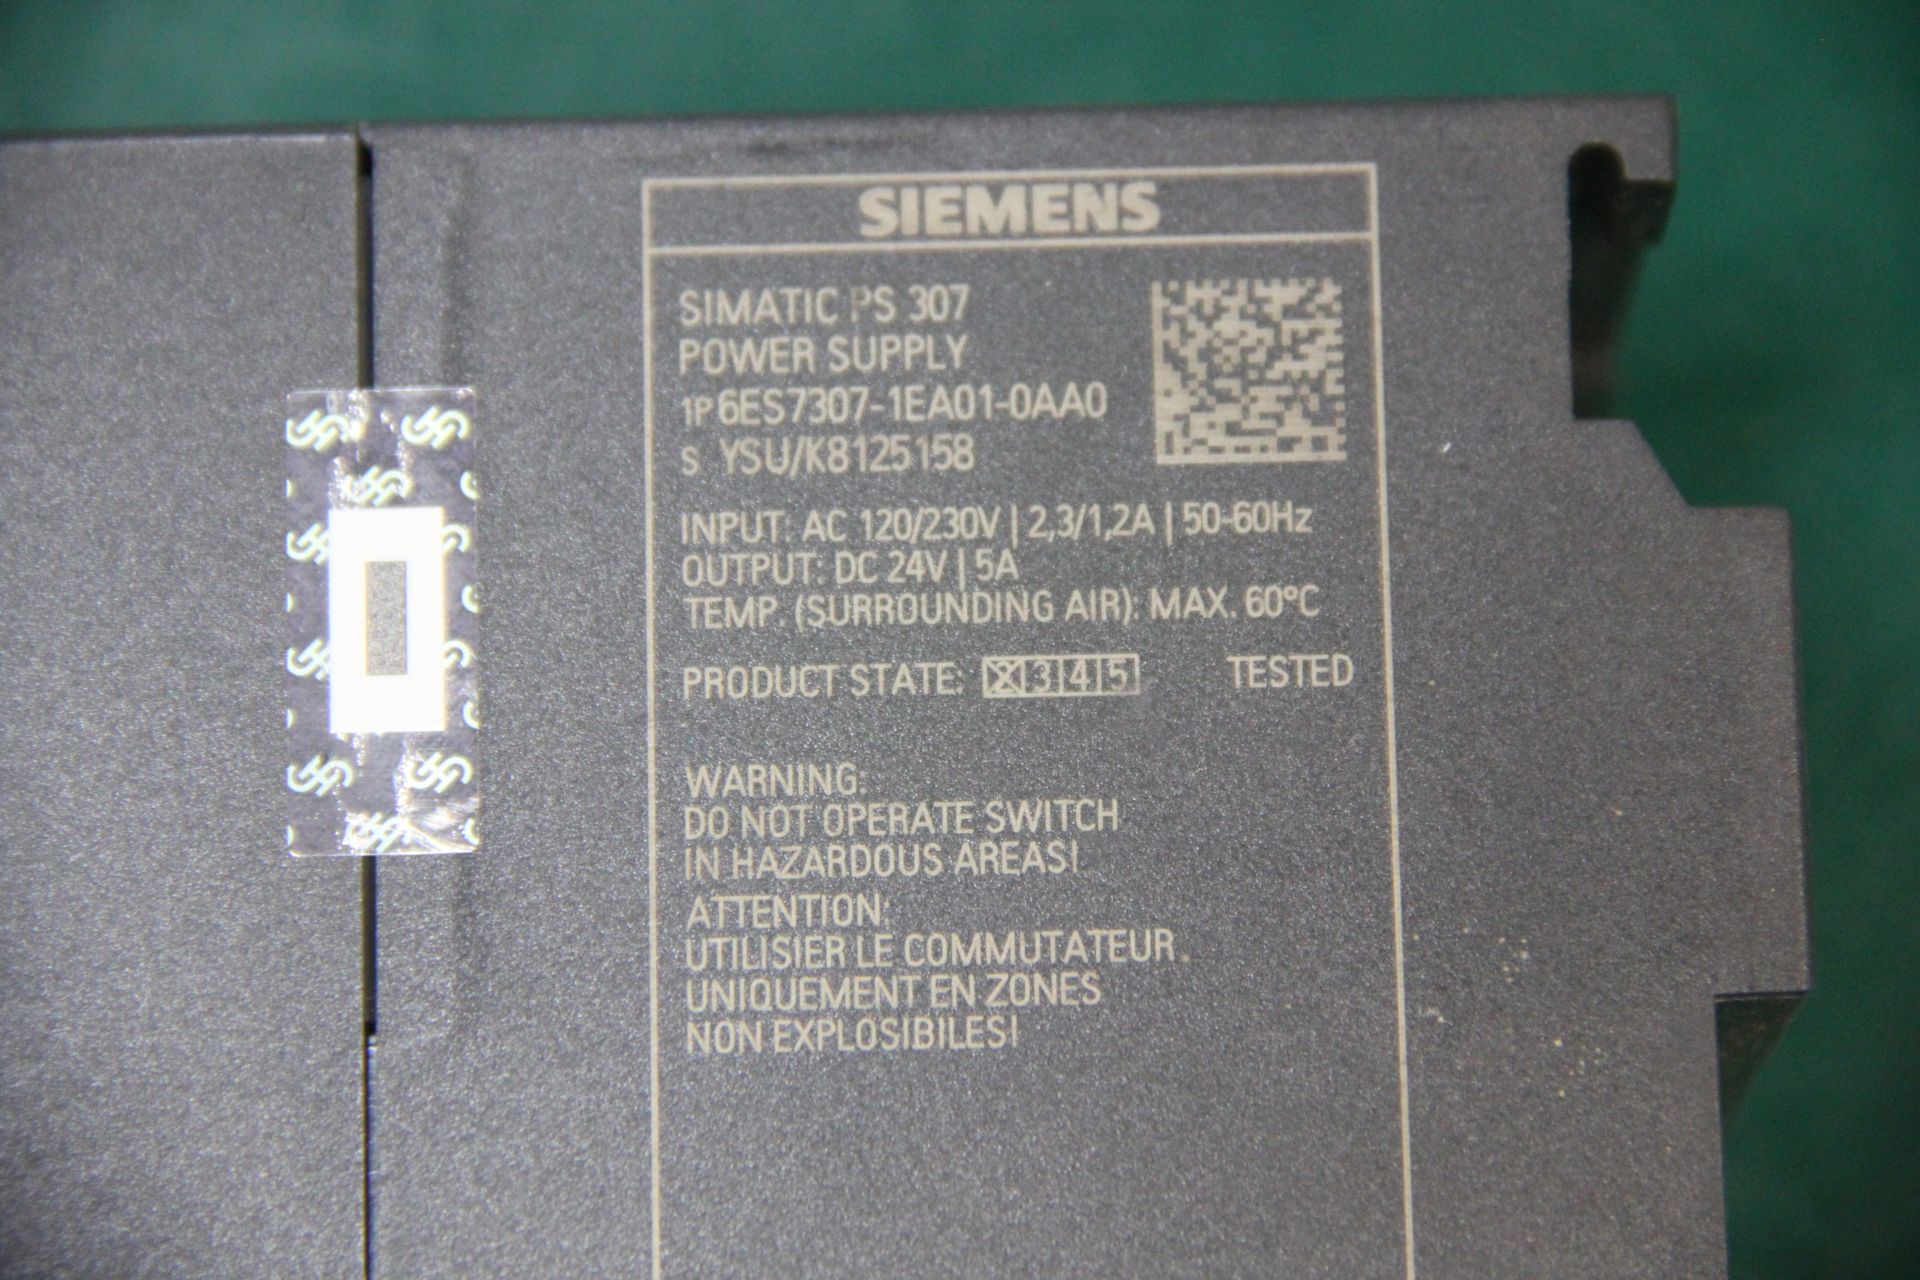 SIEMENS SIMATIC PS 307 POWER SUPPLY - Image 3 of 3